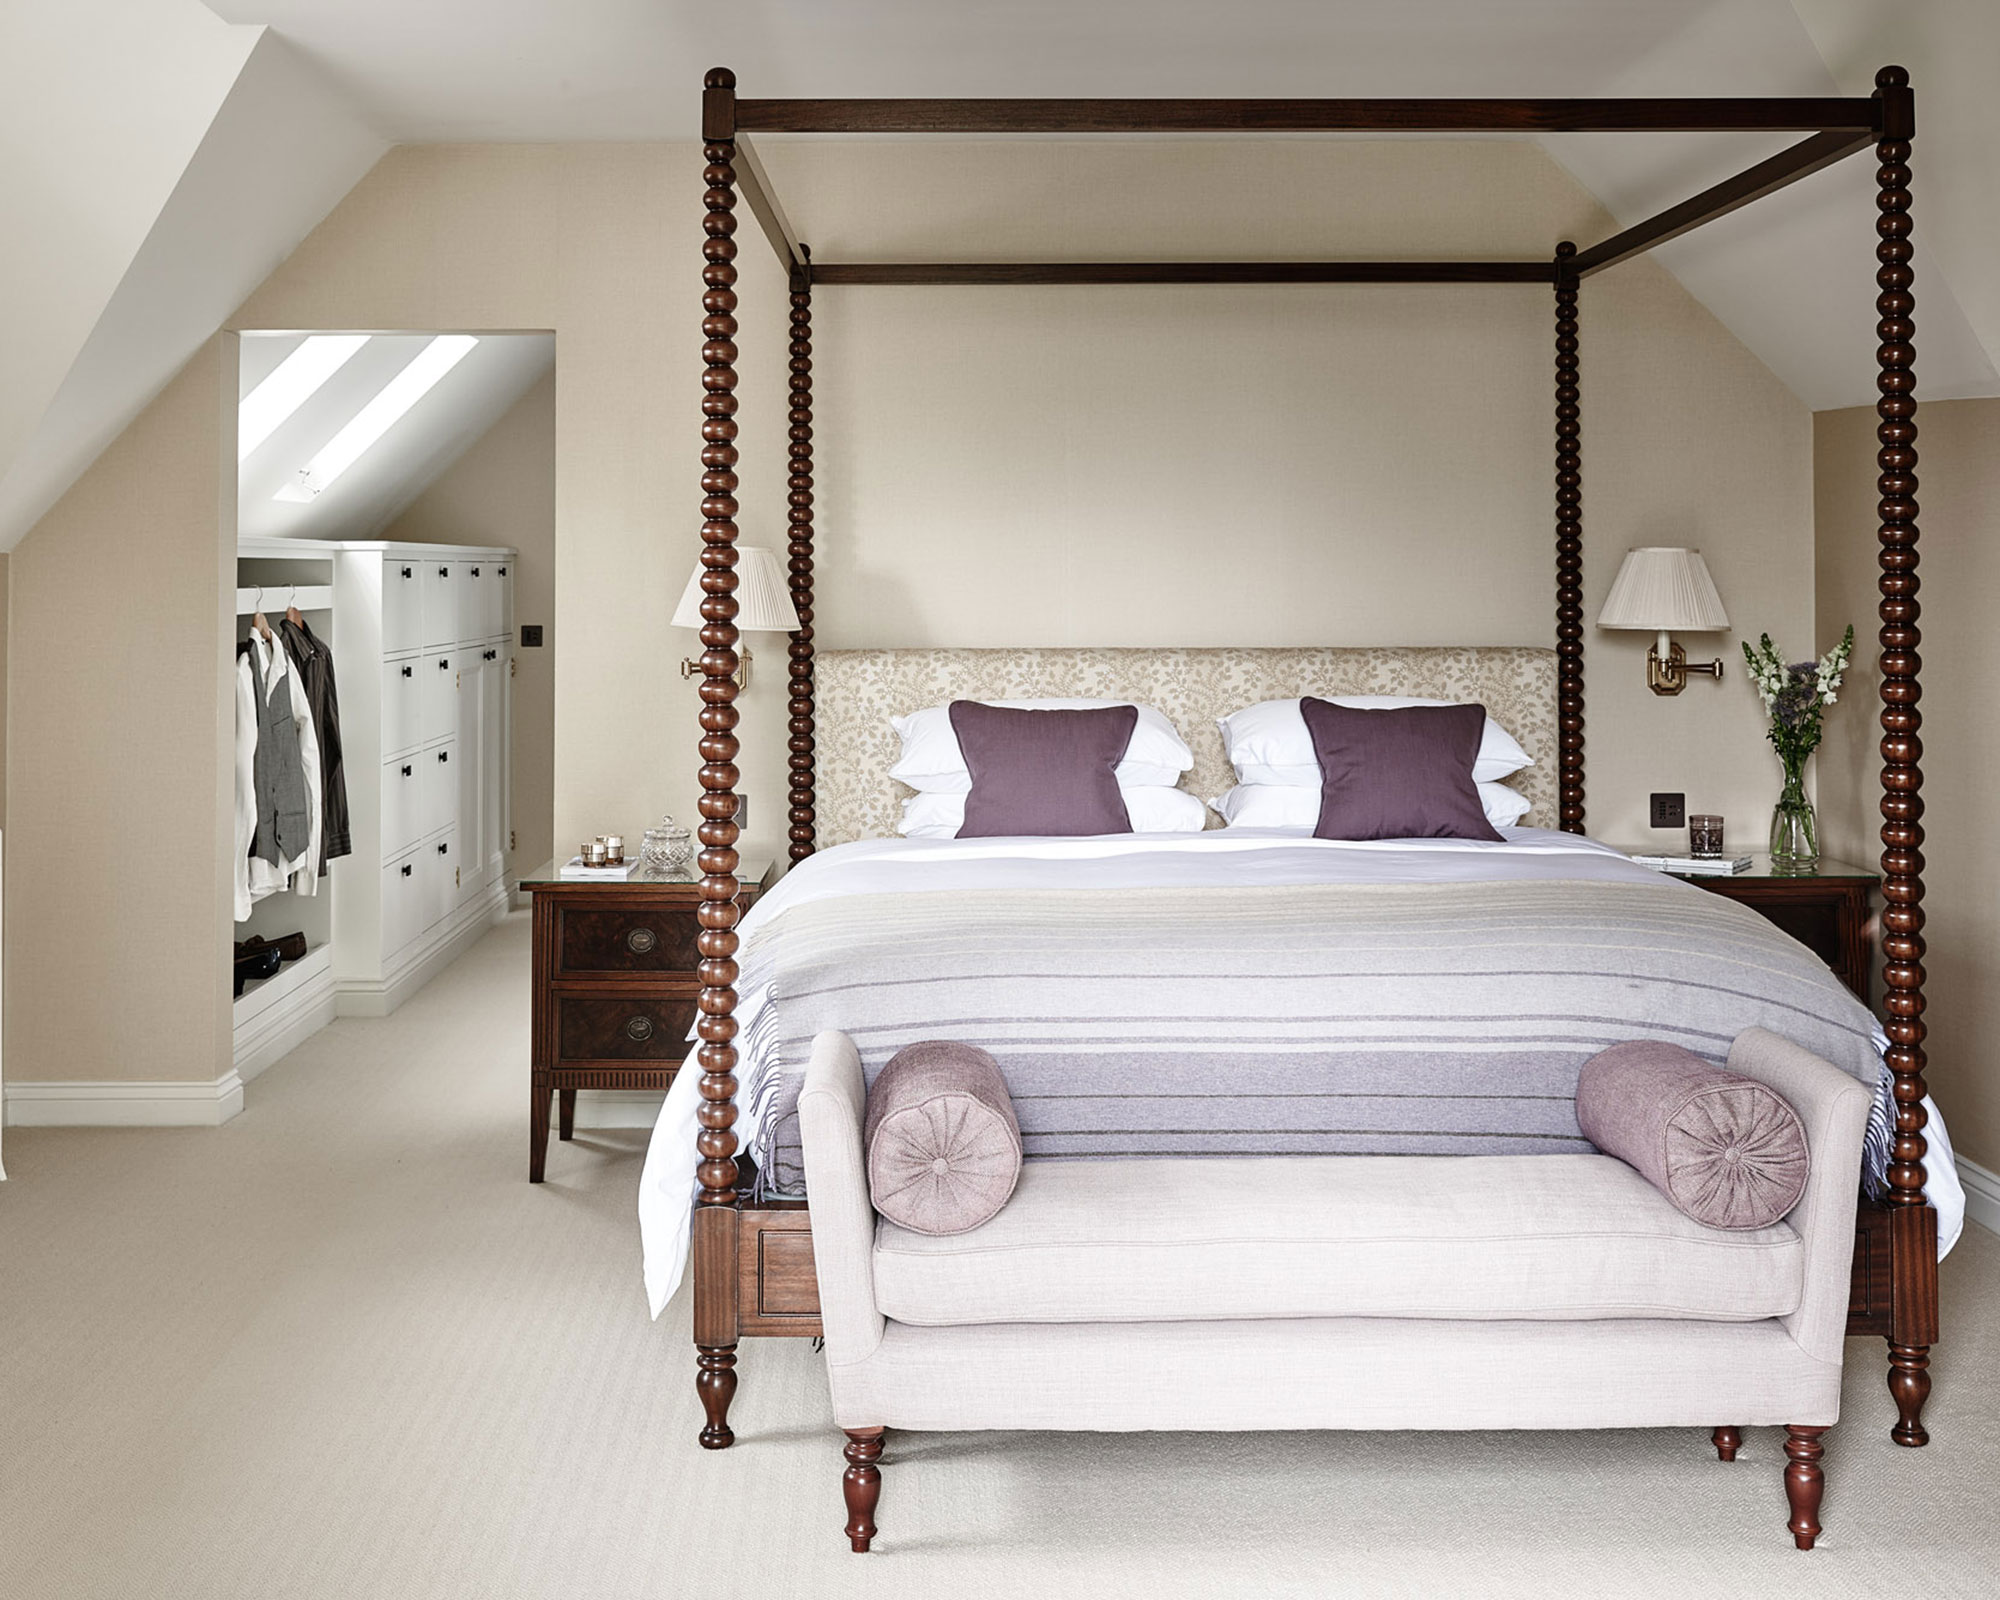 Walk-in closet ideas with white storage solutions, shown beyond a taupe colored bedroom with large four poster bed.